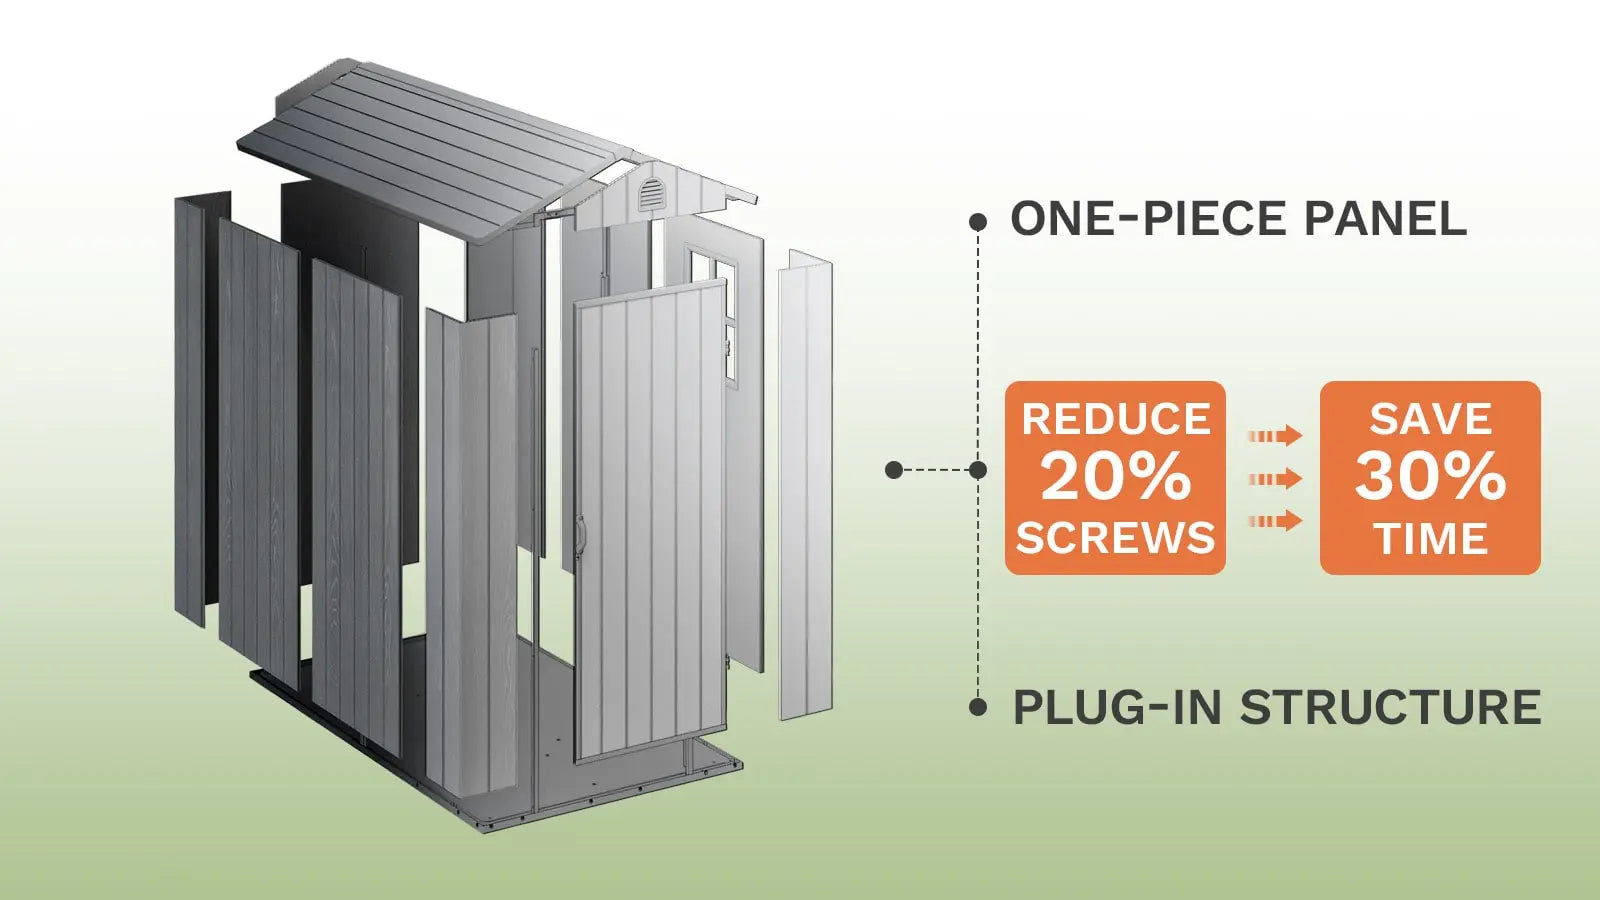 4x6 plastic storage shed one-piece design and plug-in structure.